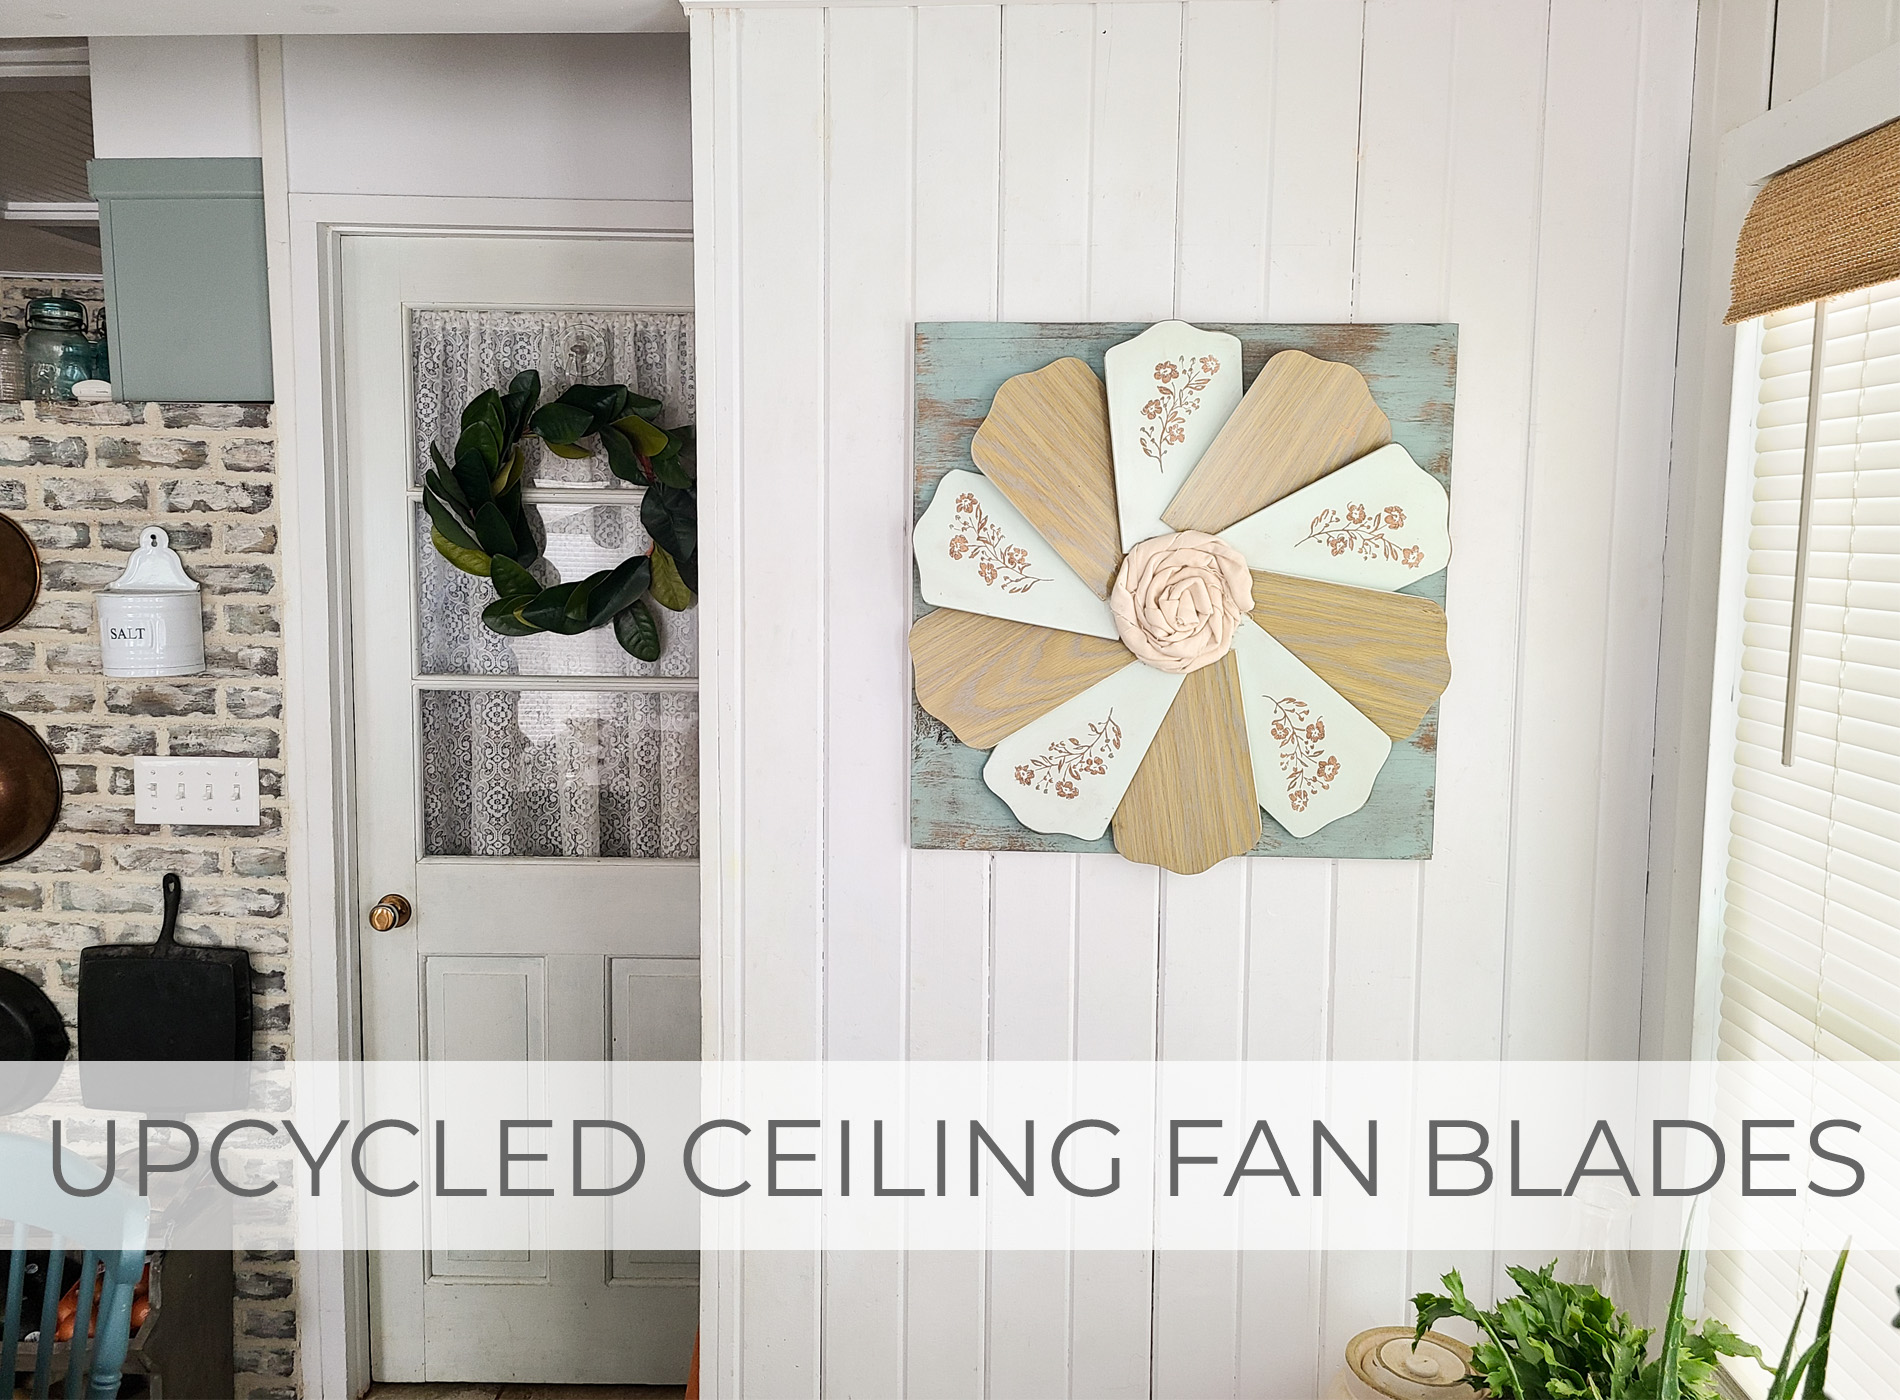 Upcycled Ceiling Fan Blades into Farmhouse Wall Art by Larissa of Prodigal Pieces | prodigalpieces.com #prodigalpieces #upcycled #art #farmhouse